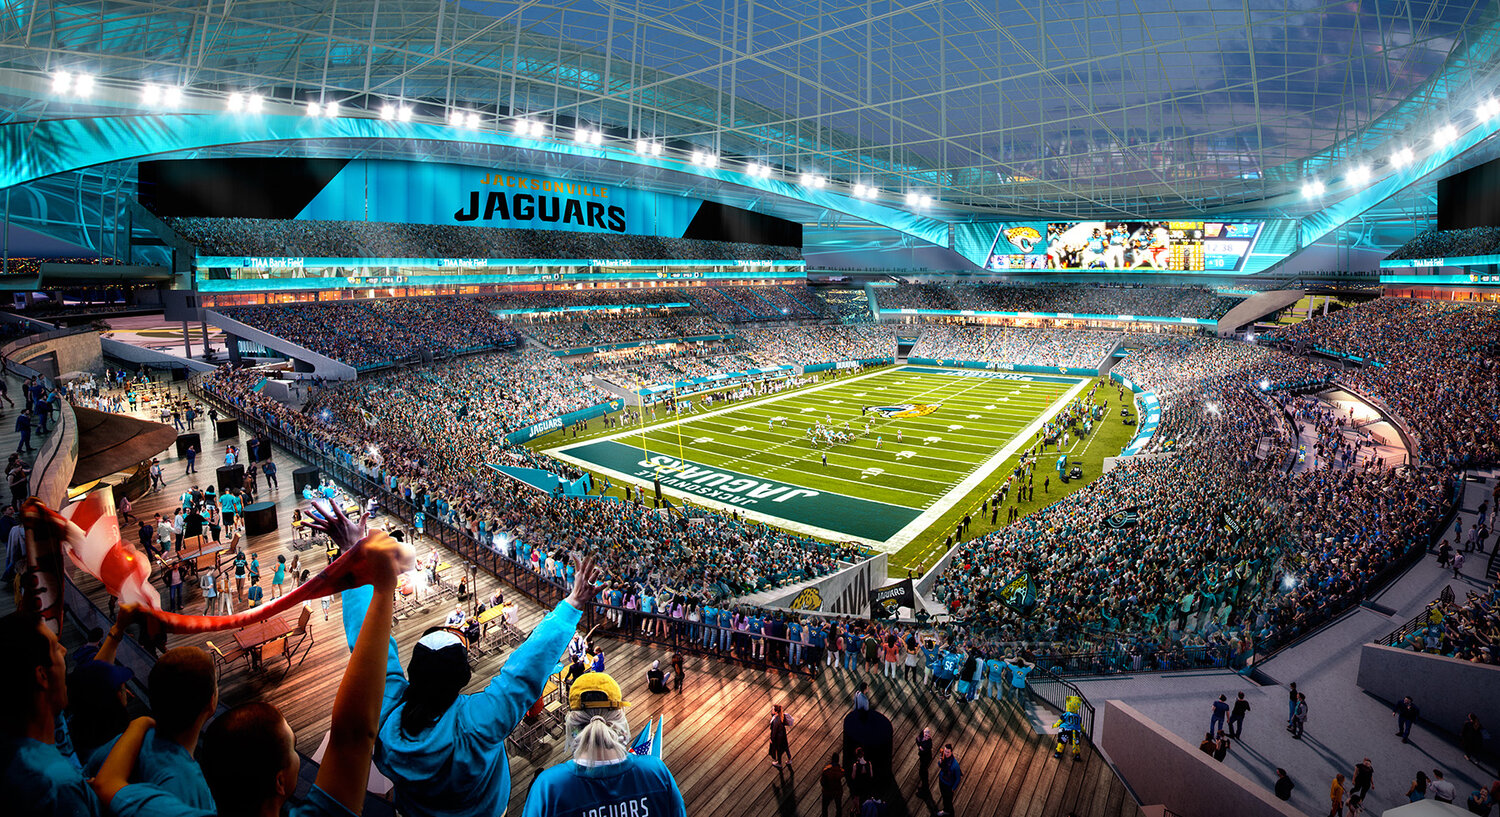 The maximum capacity of the stadium is projected to be 72,000 for events such as the Florida-Georgia Game or concerts but would probably seat 62,000 on average for Jaguars games.